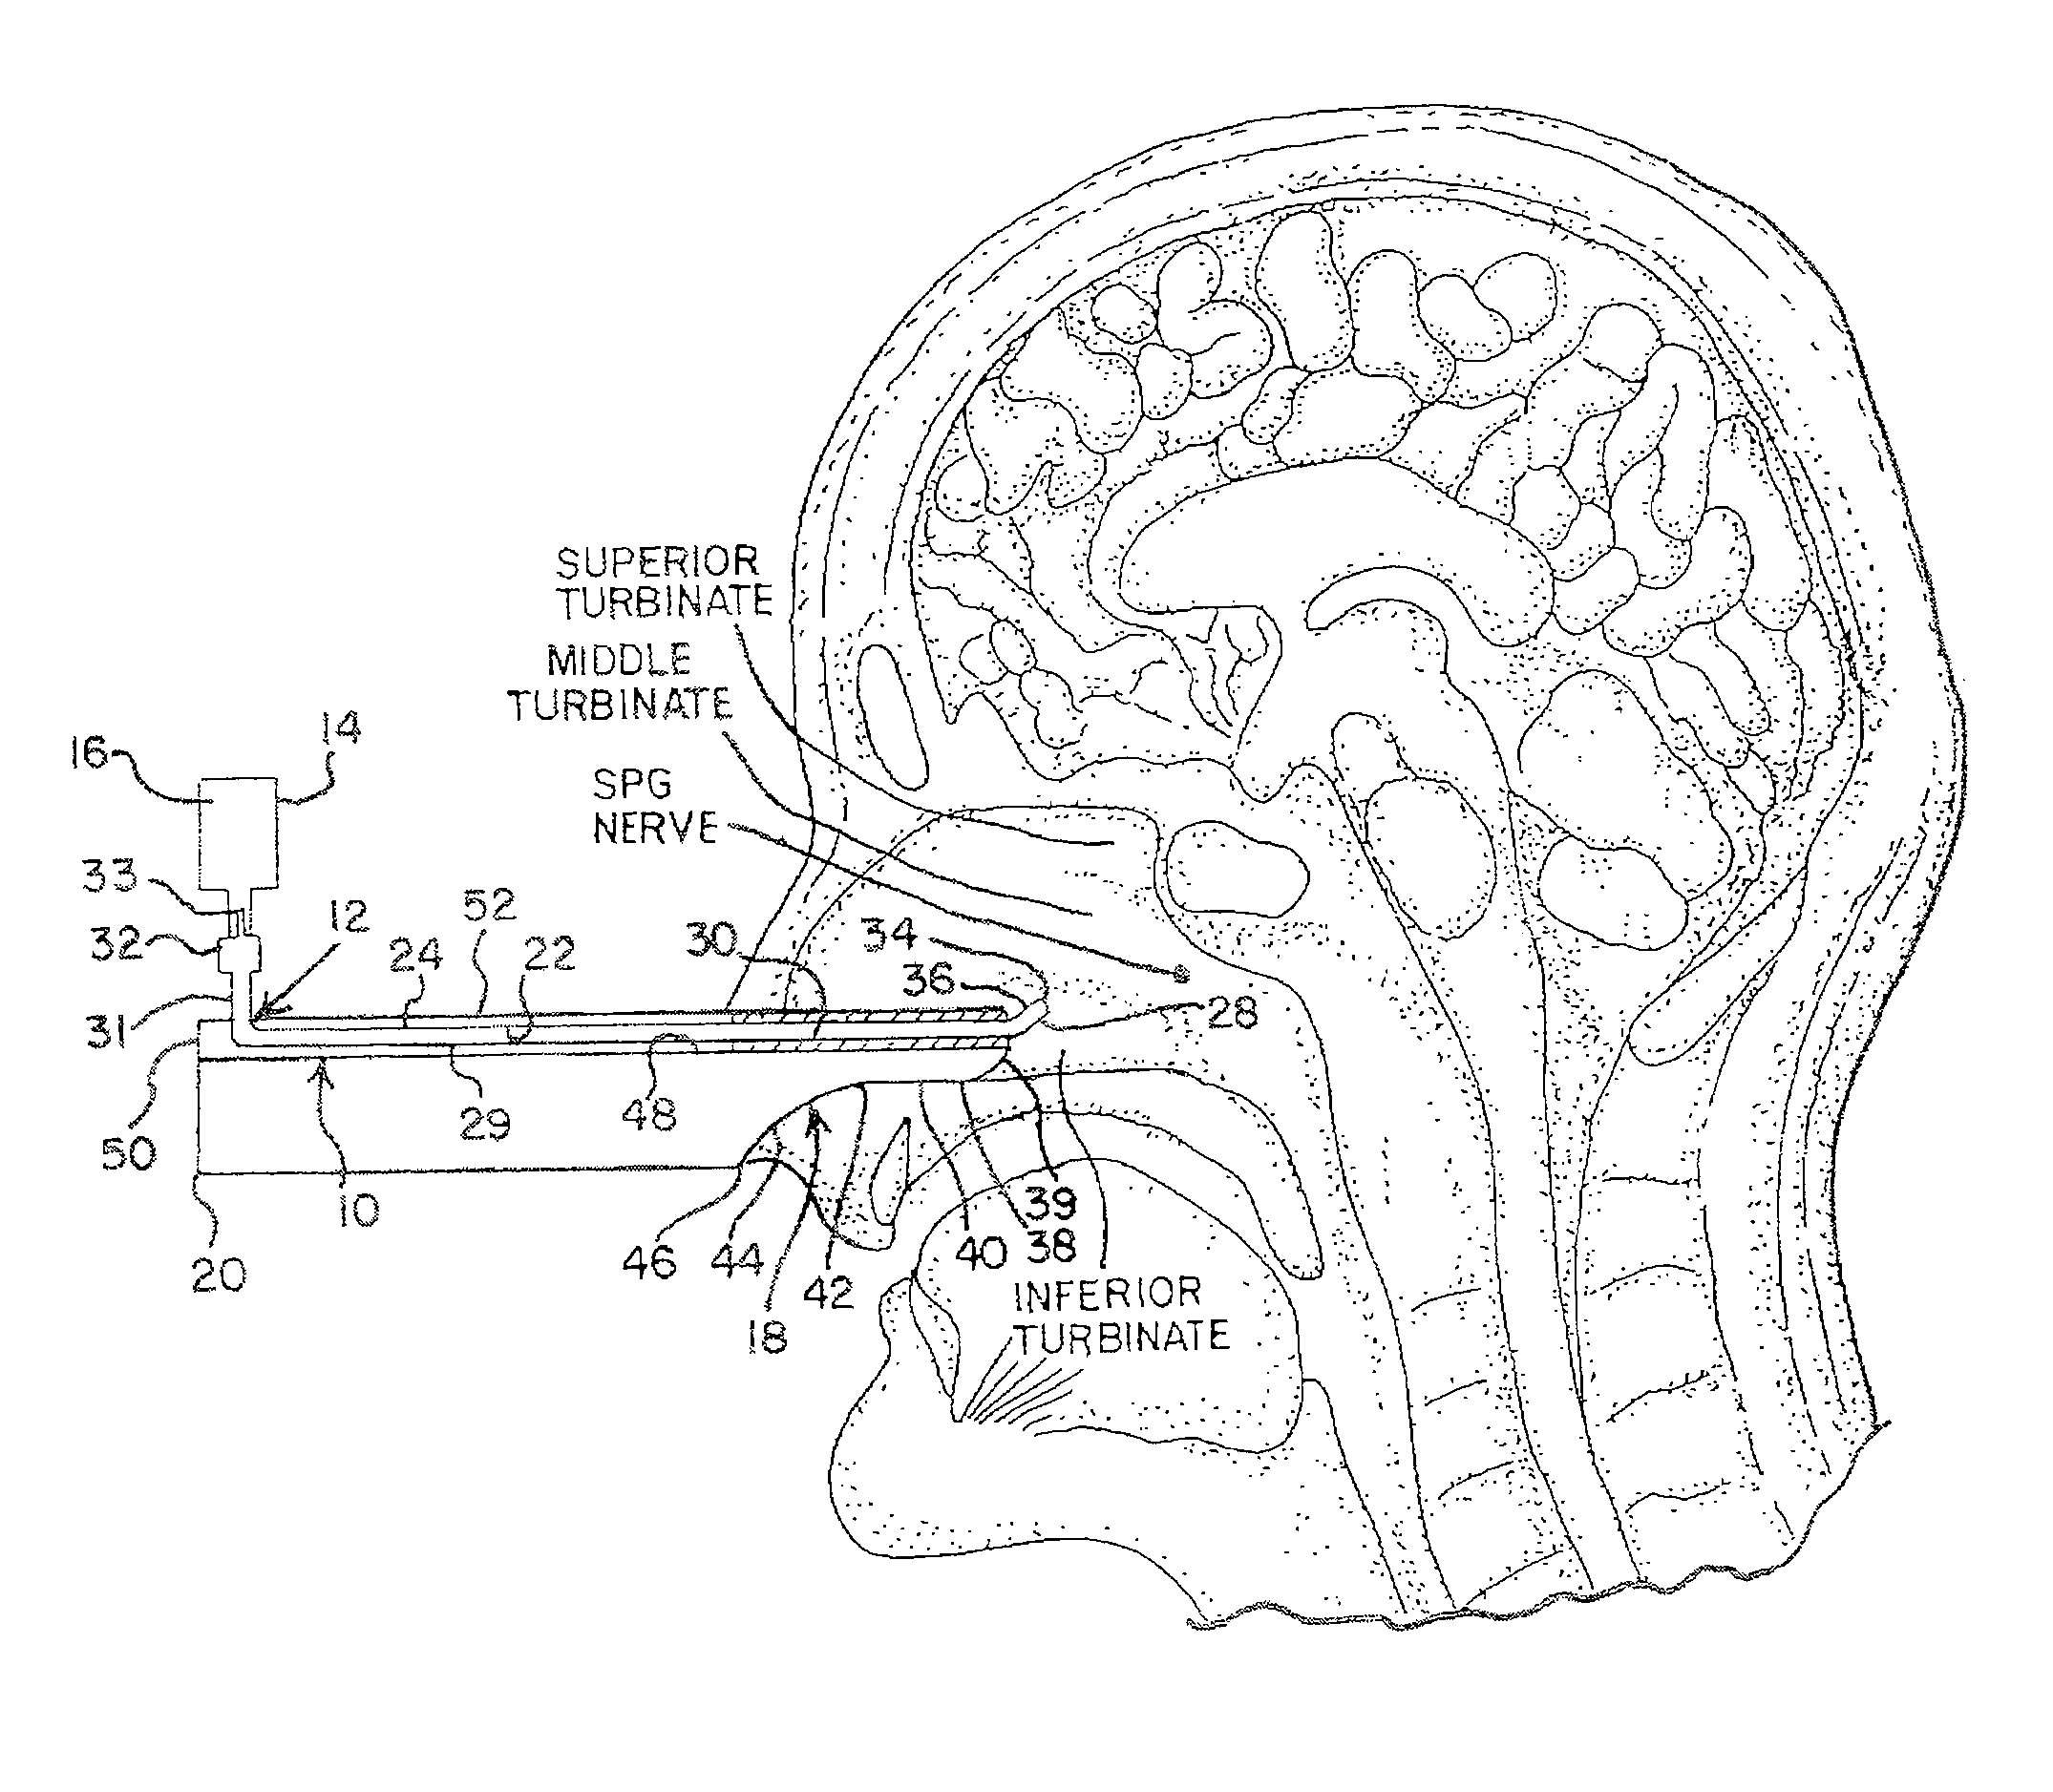 Devices for Delivering a Medicament and Methods for Ameliorating Pain